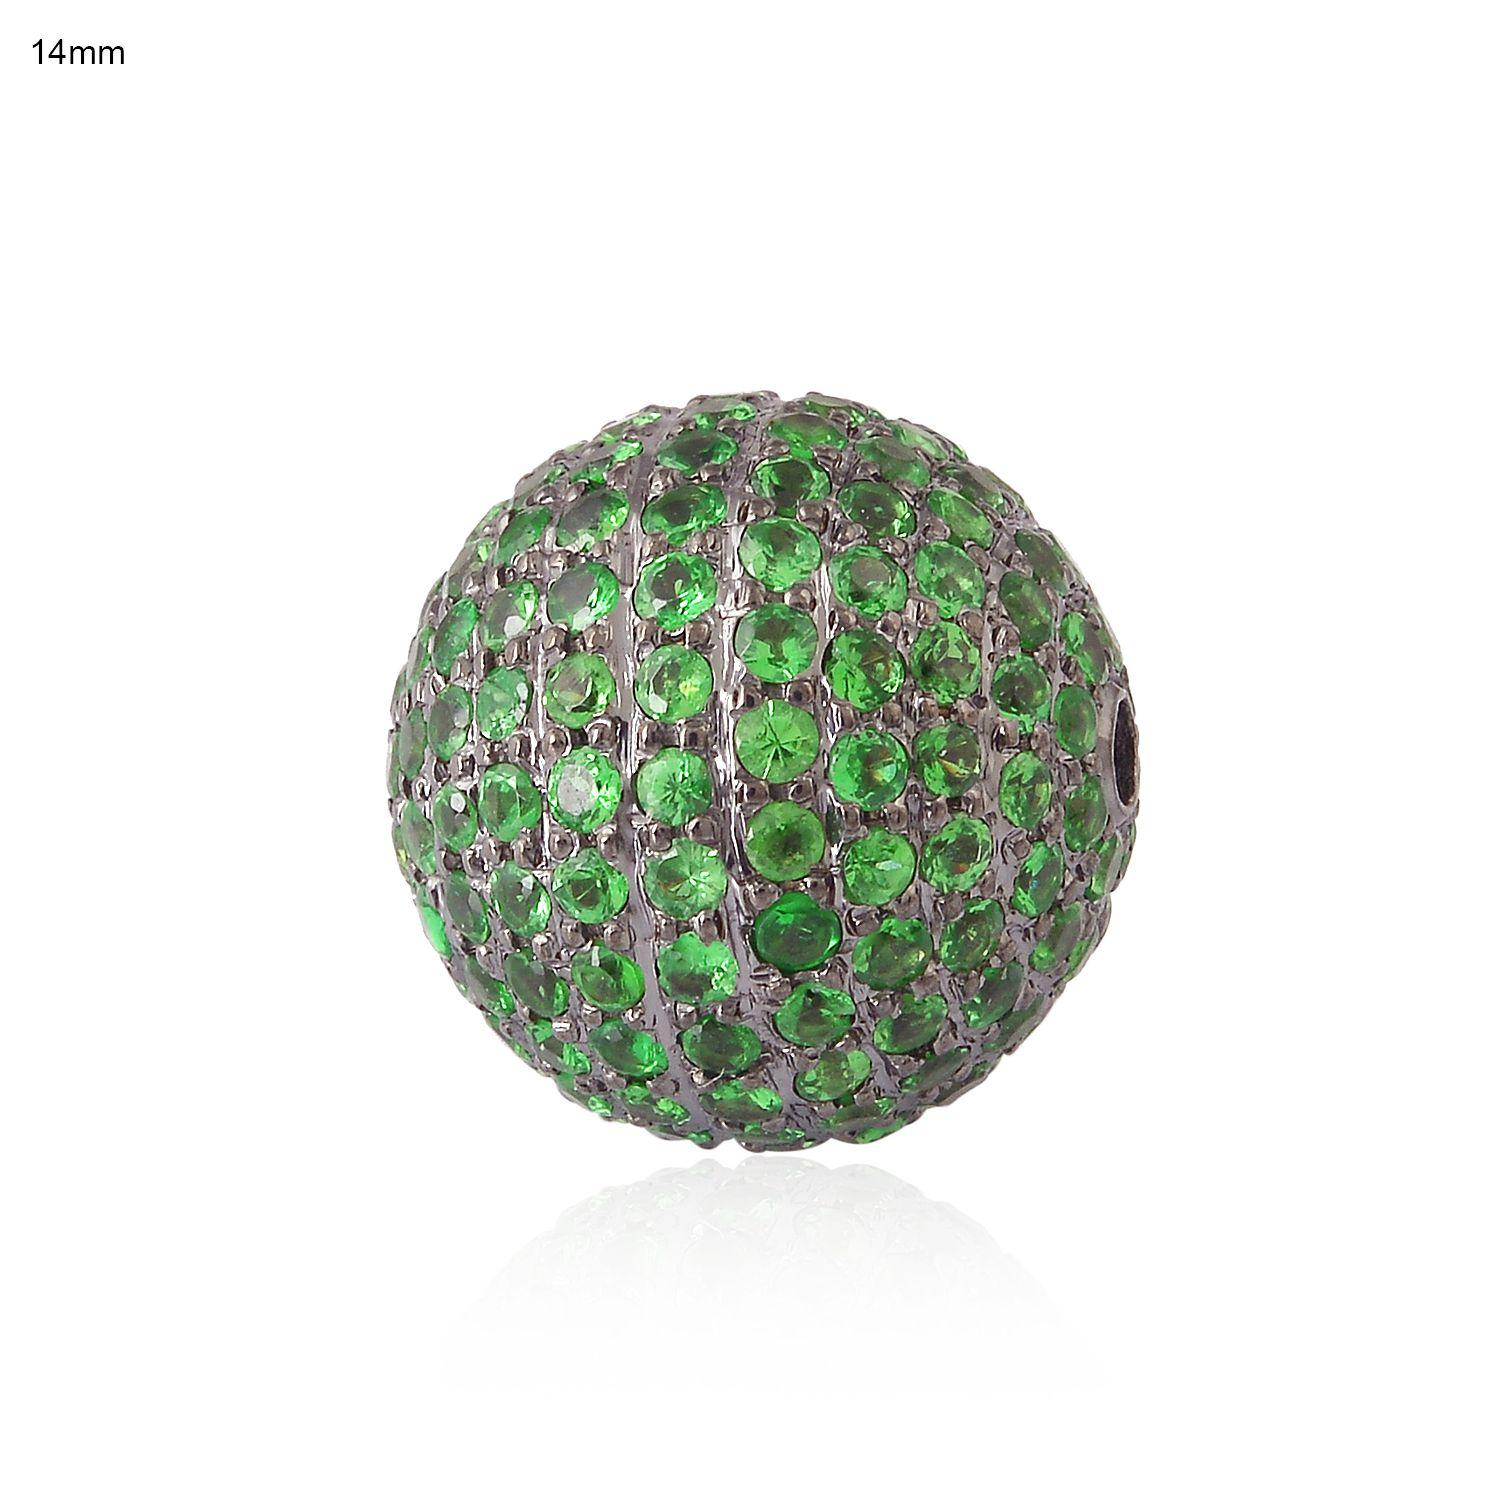 Green Circle with Silver Ball Logo - Ruby Silver Pave Diamond Bead. Wholesale Pave Beads. Jewelry